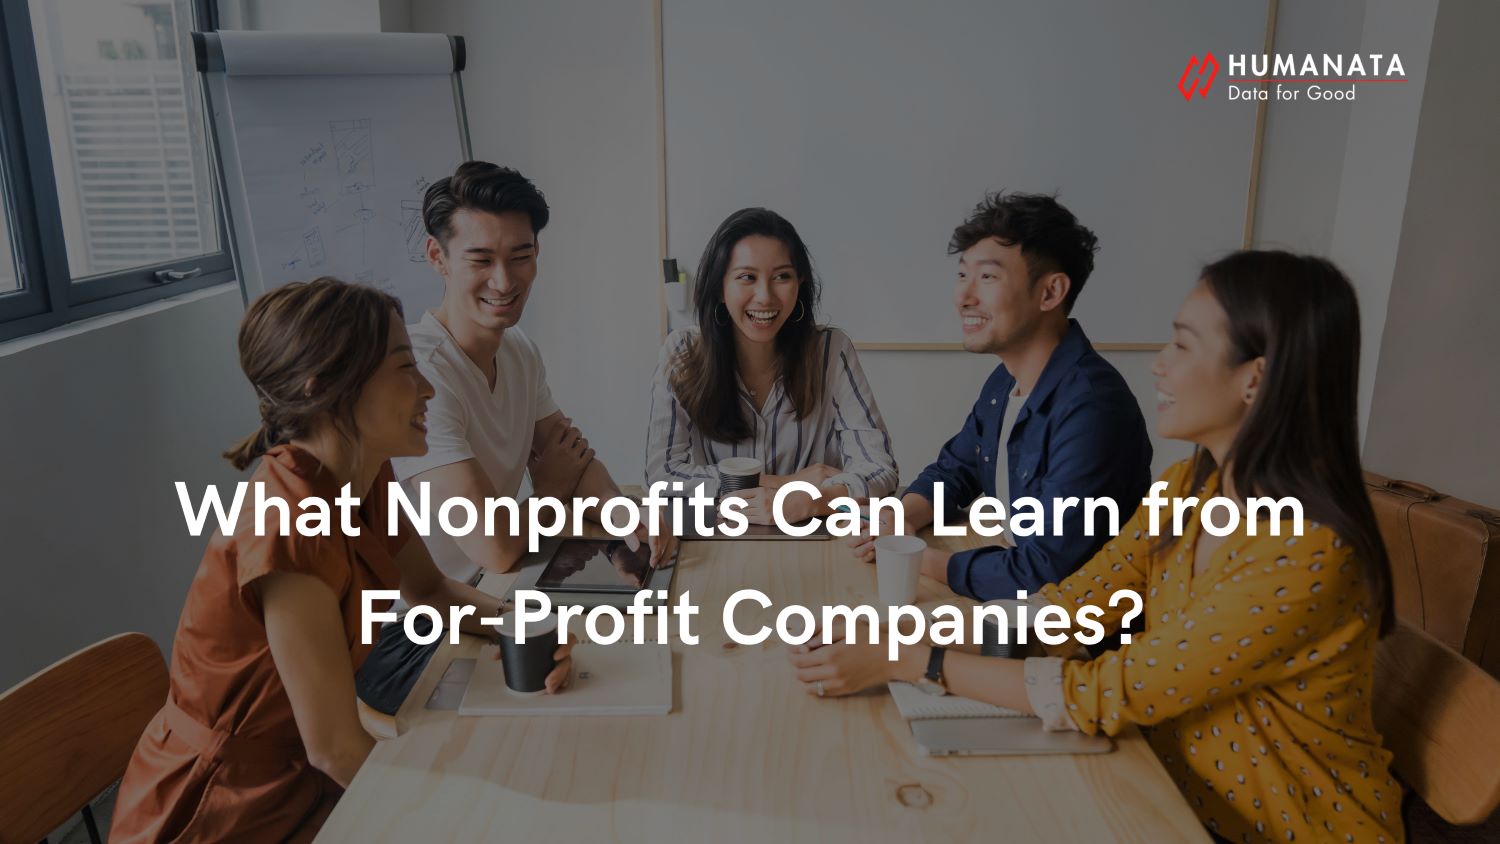 5 Simple Steps for Nonprofits: Learn from the For-Profit World